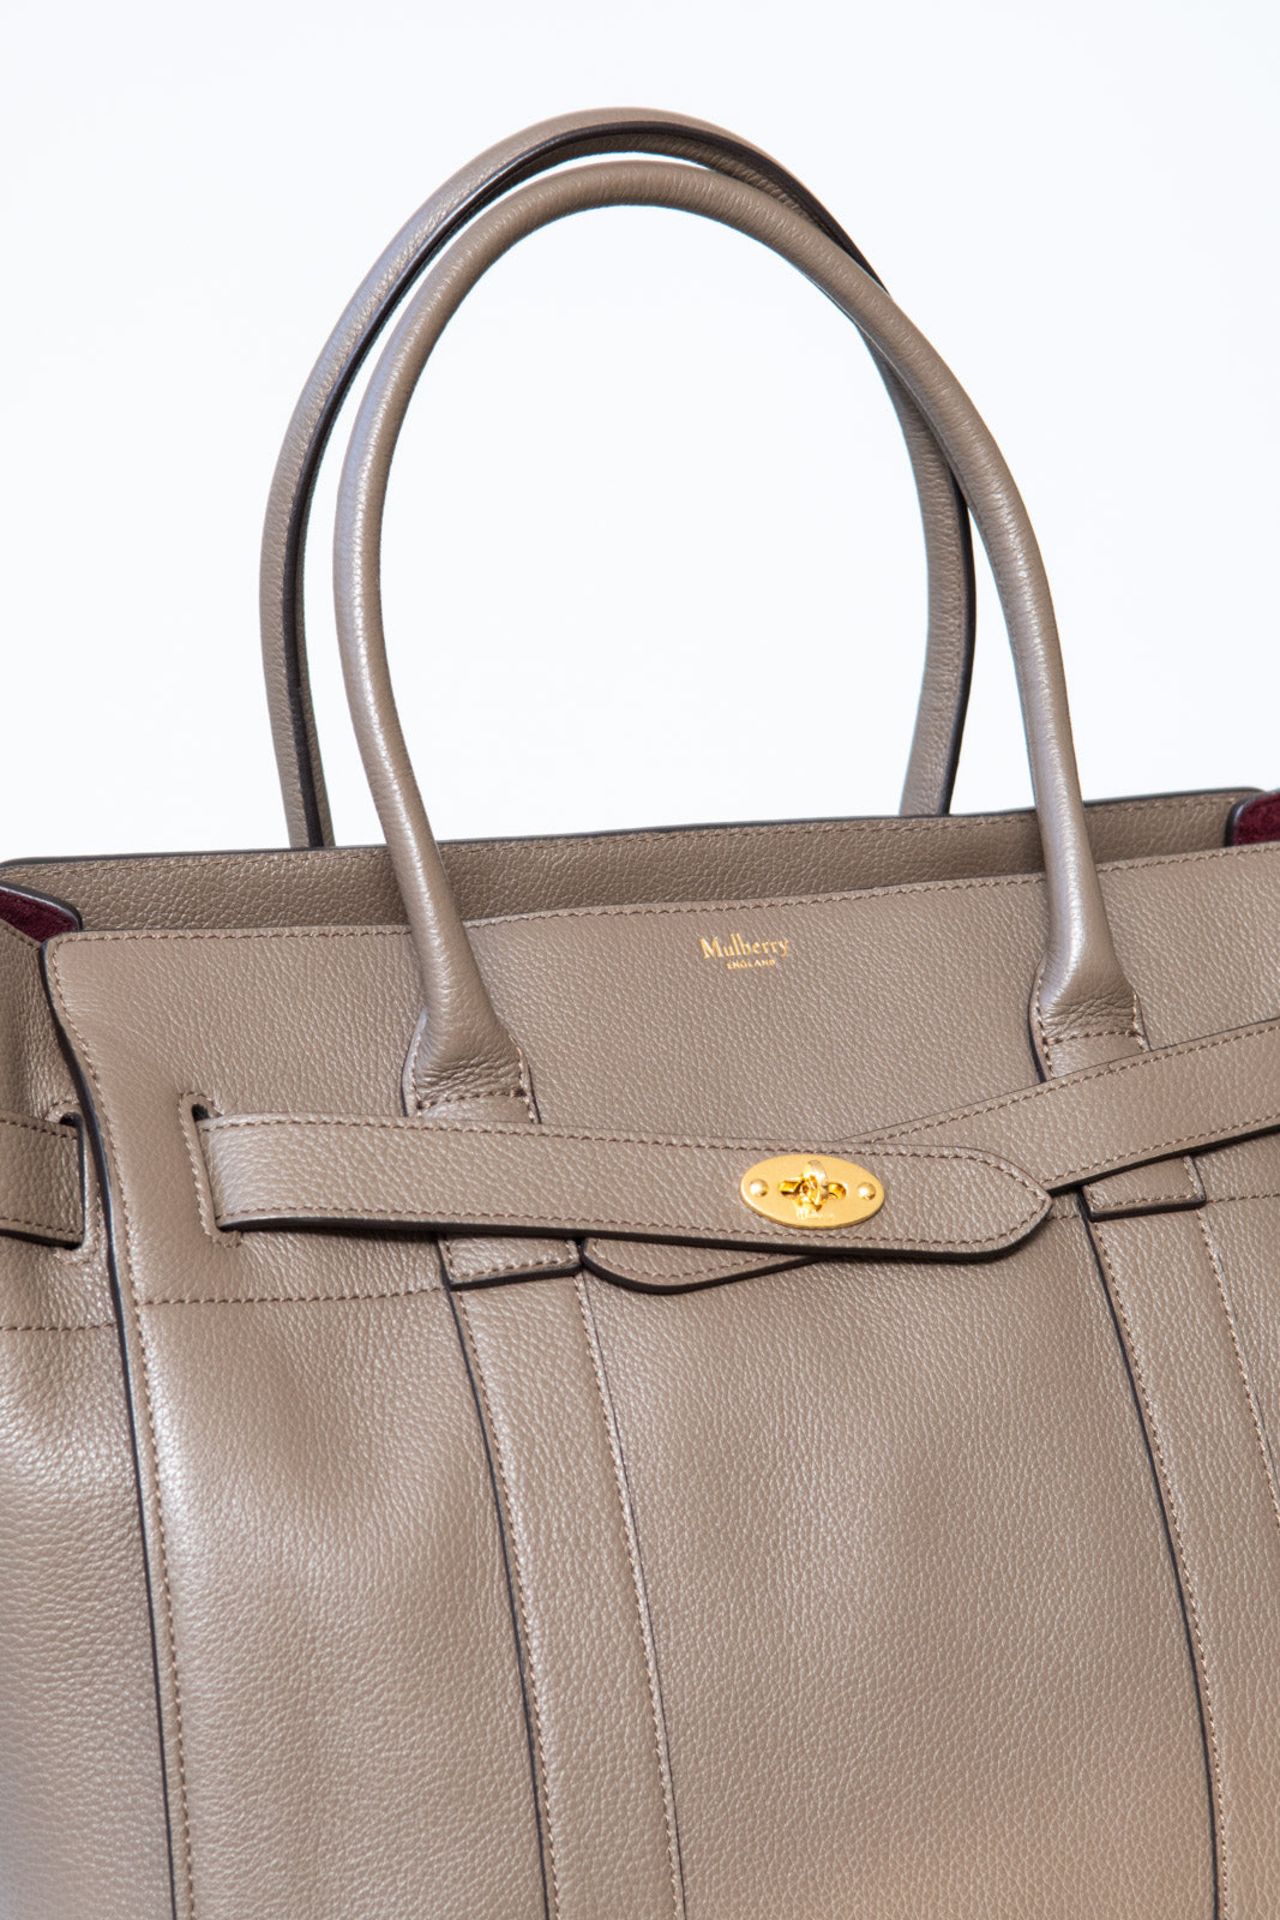 Mulberry Mushroom Zipped Bayswater Leather Bag - Image 2 of 10